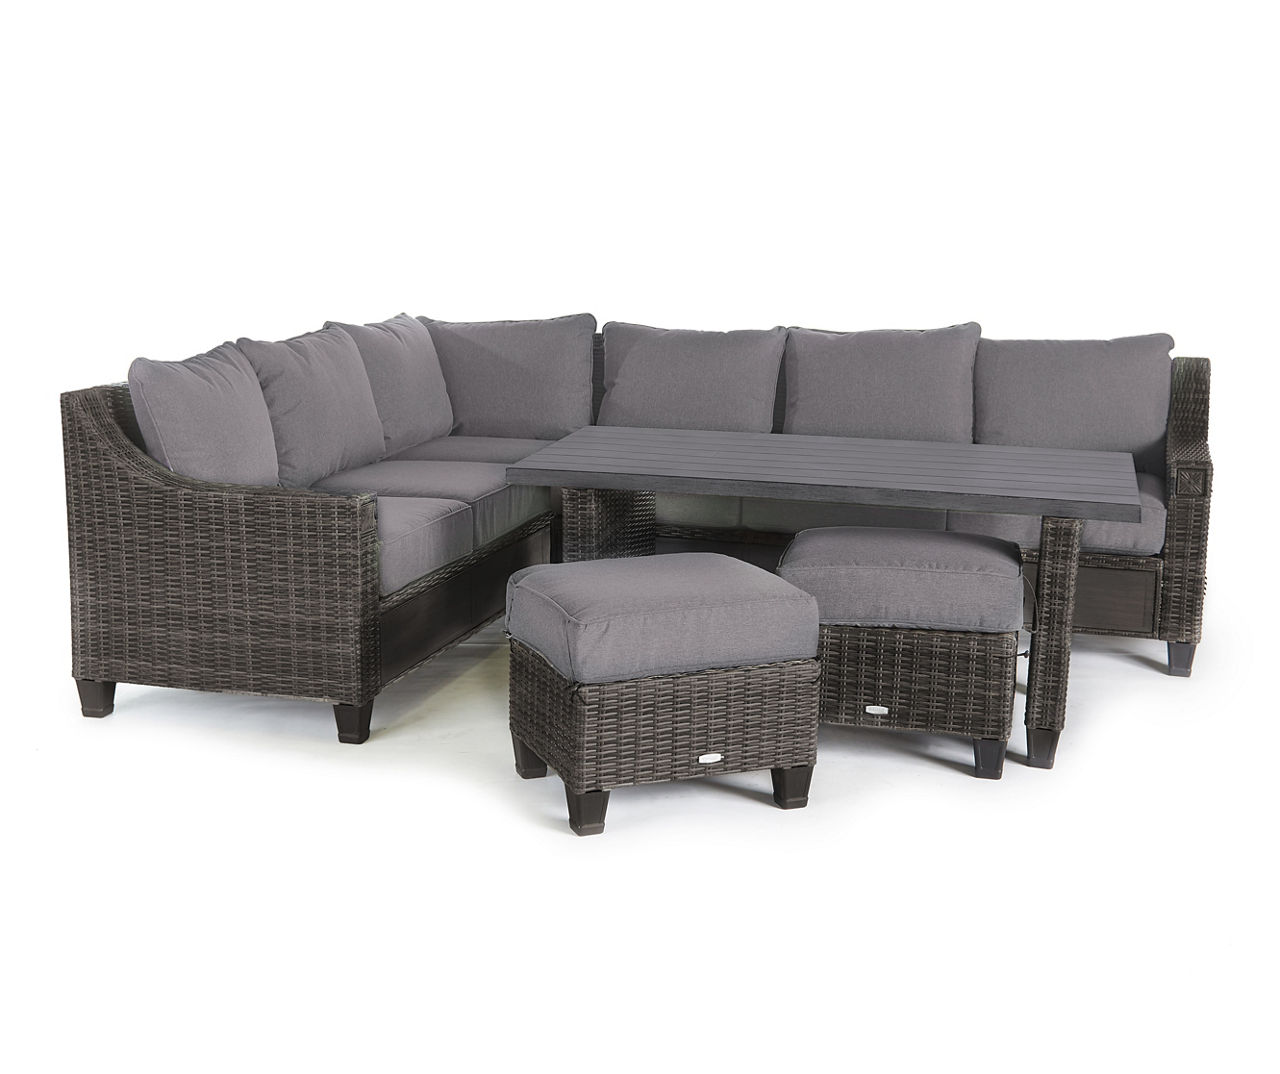 Dekking Verhandeling hurken Broyhill Broyhill Sandpointe Sectional, Ottoman & Table All-Weather Wicker  Cushioned Patio Seating Set | Big Lots